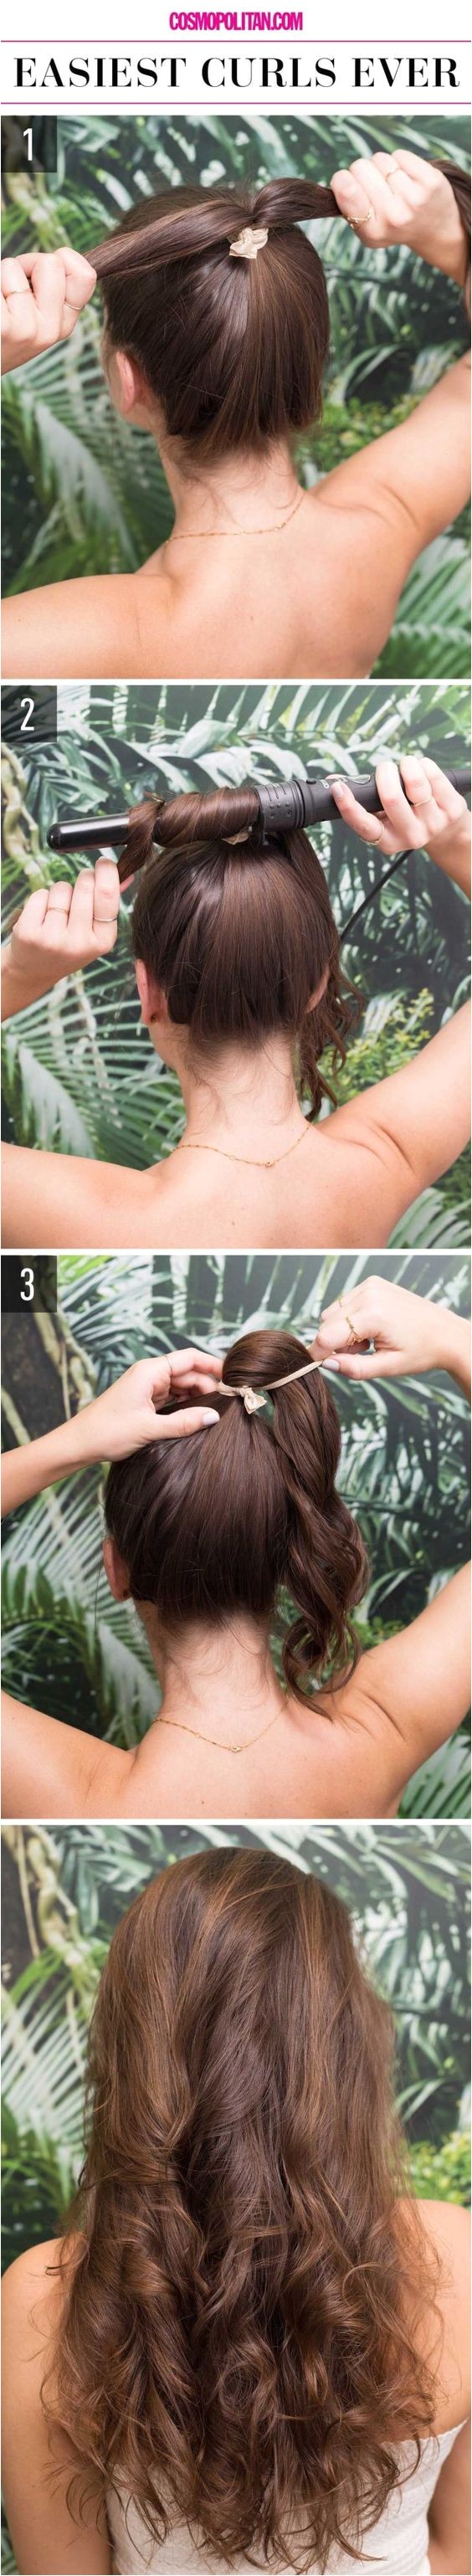 easy hairstyles lazy girls